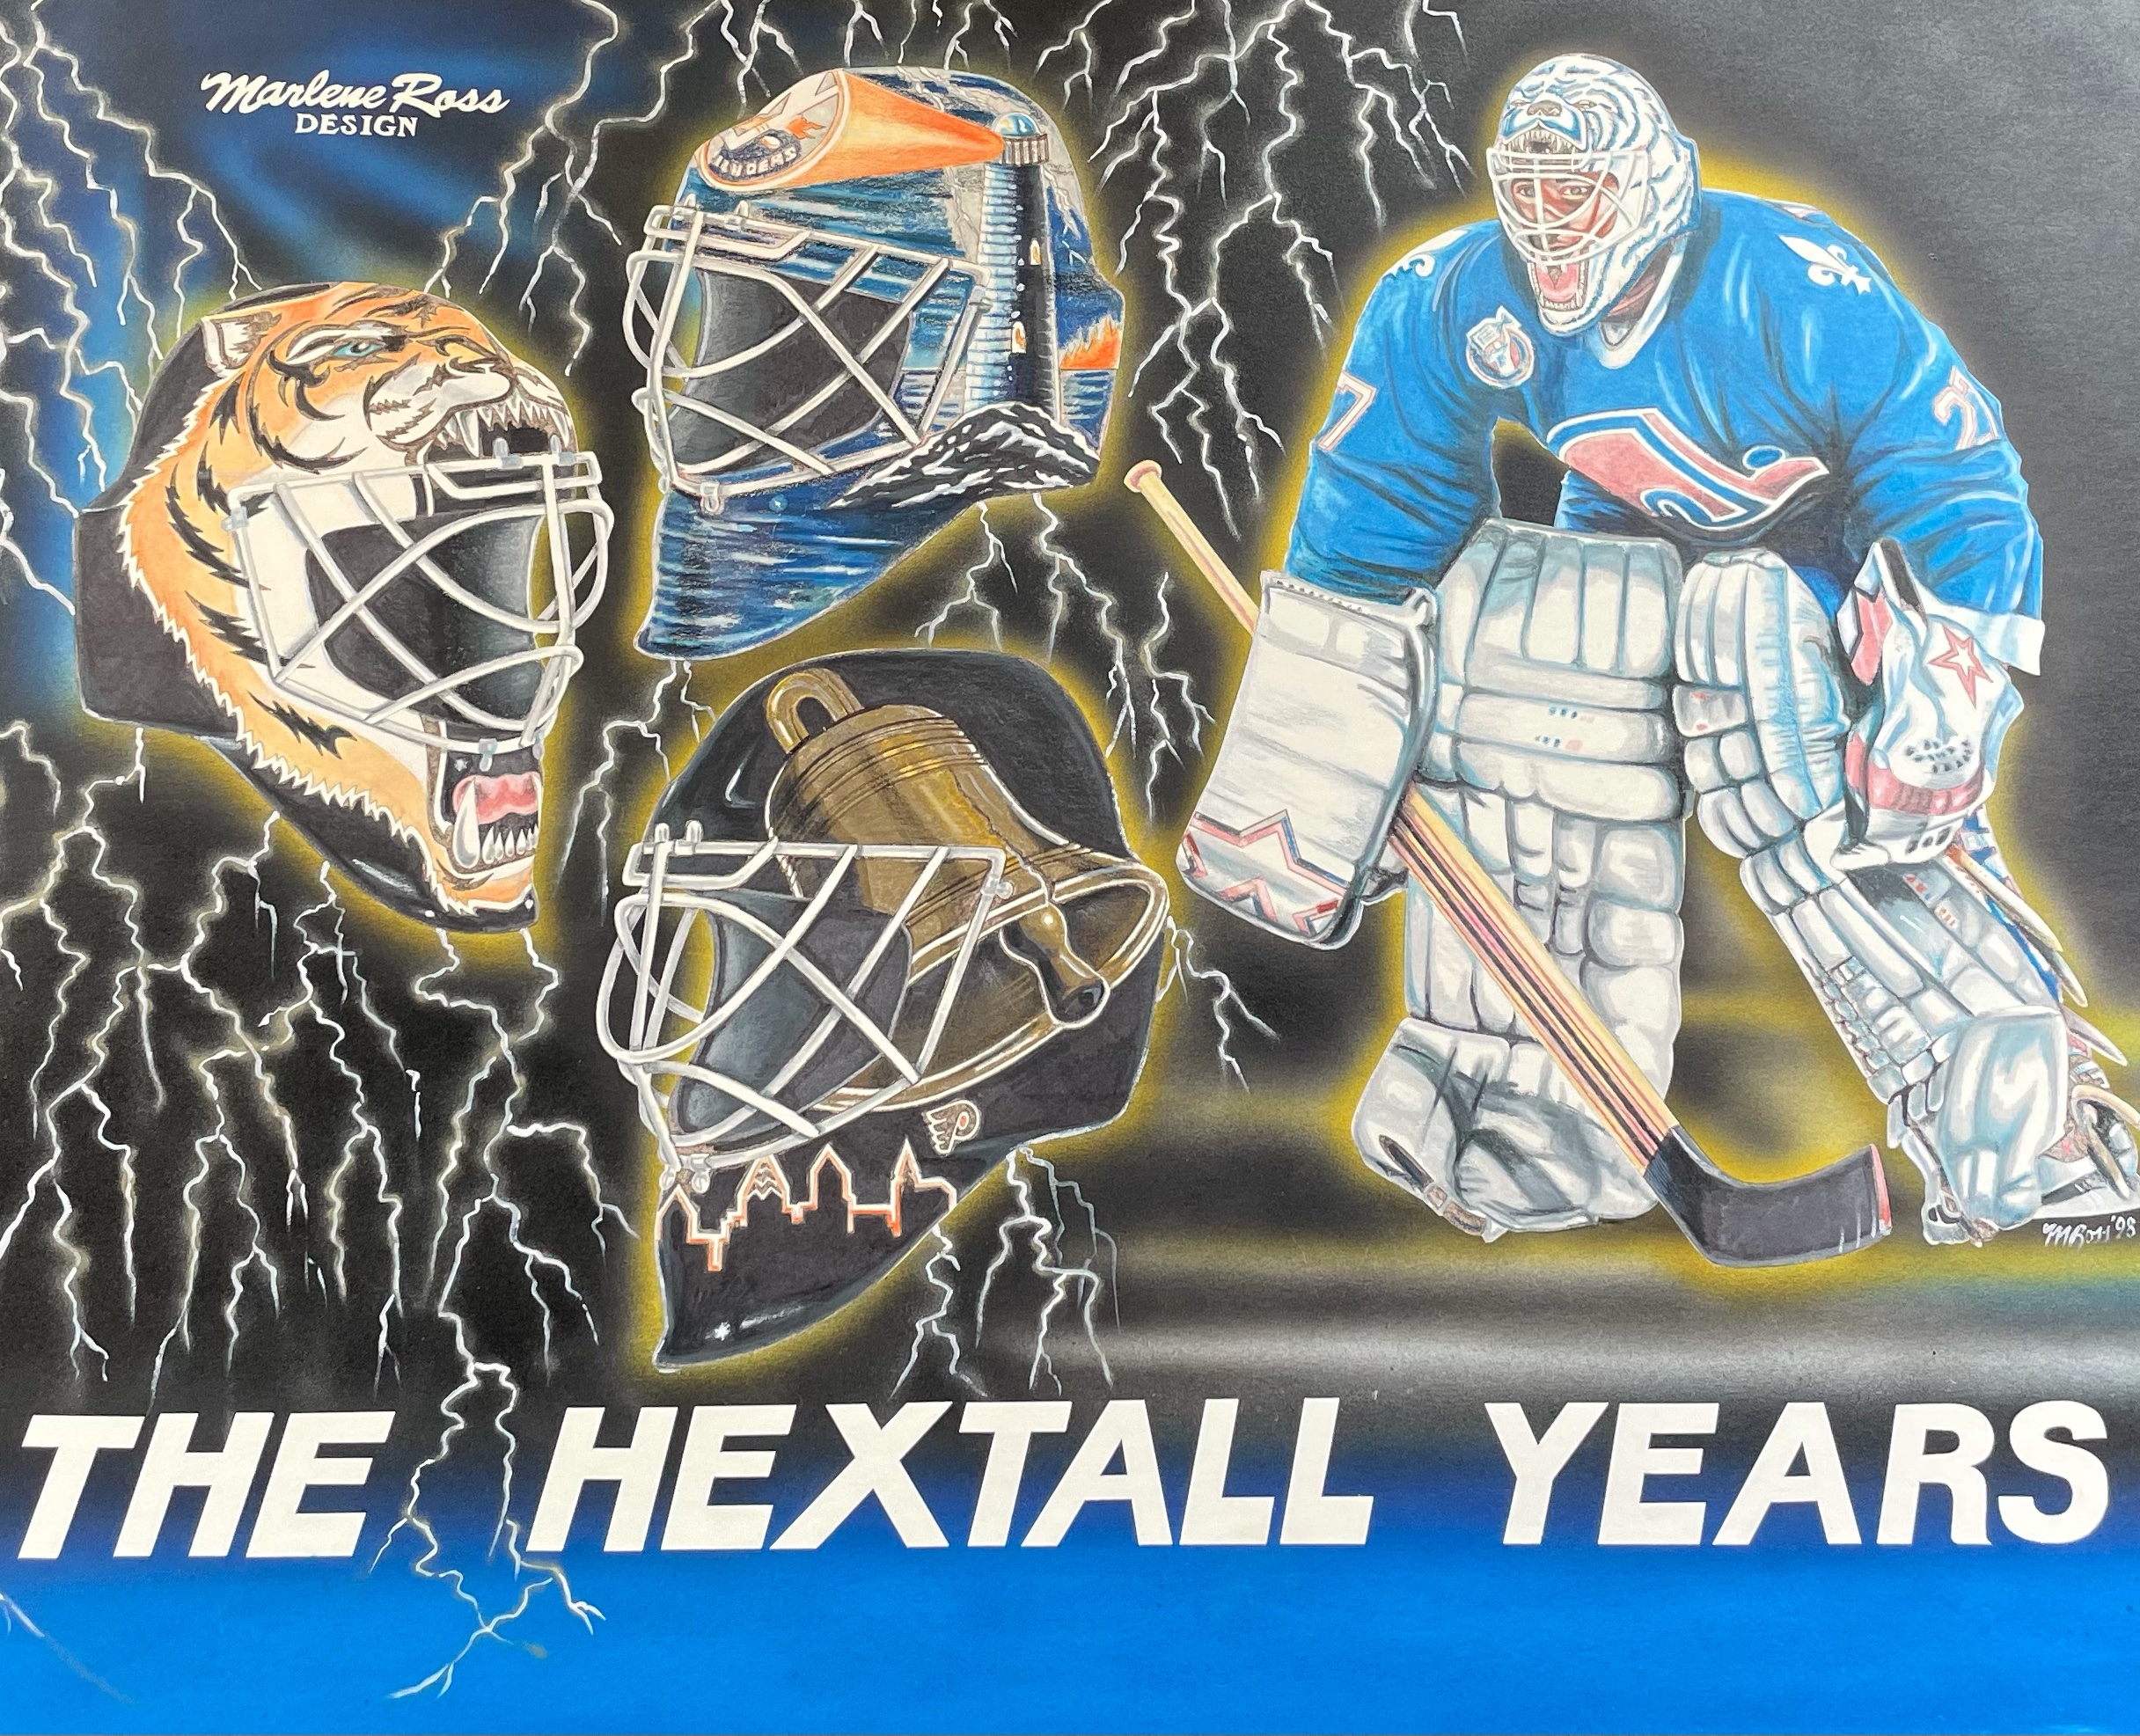 The Hextall Years